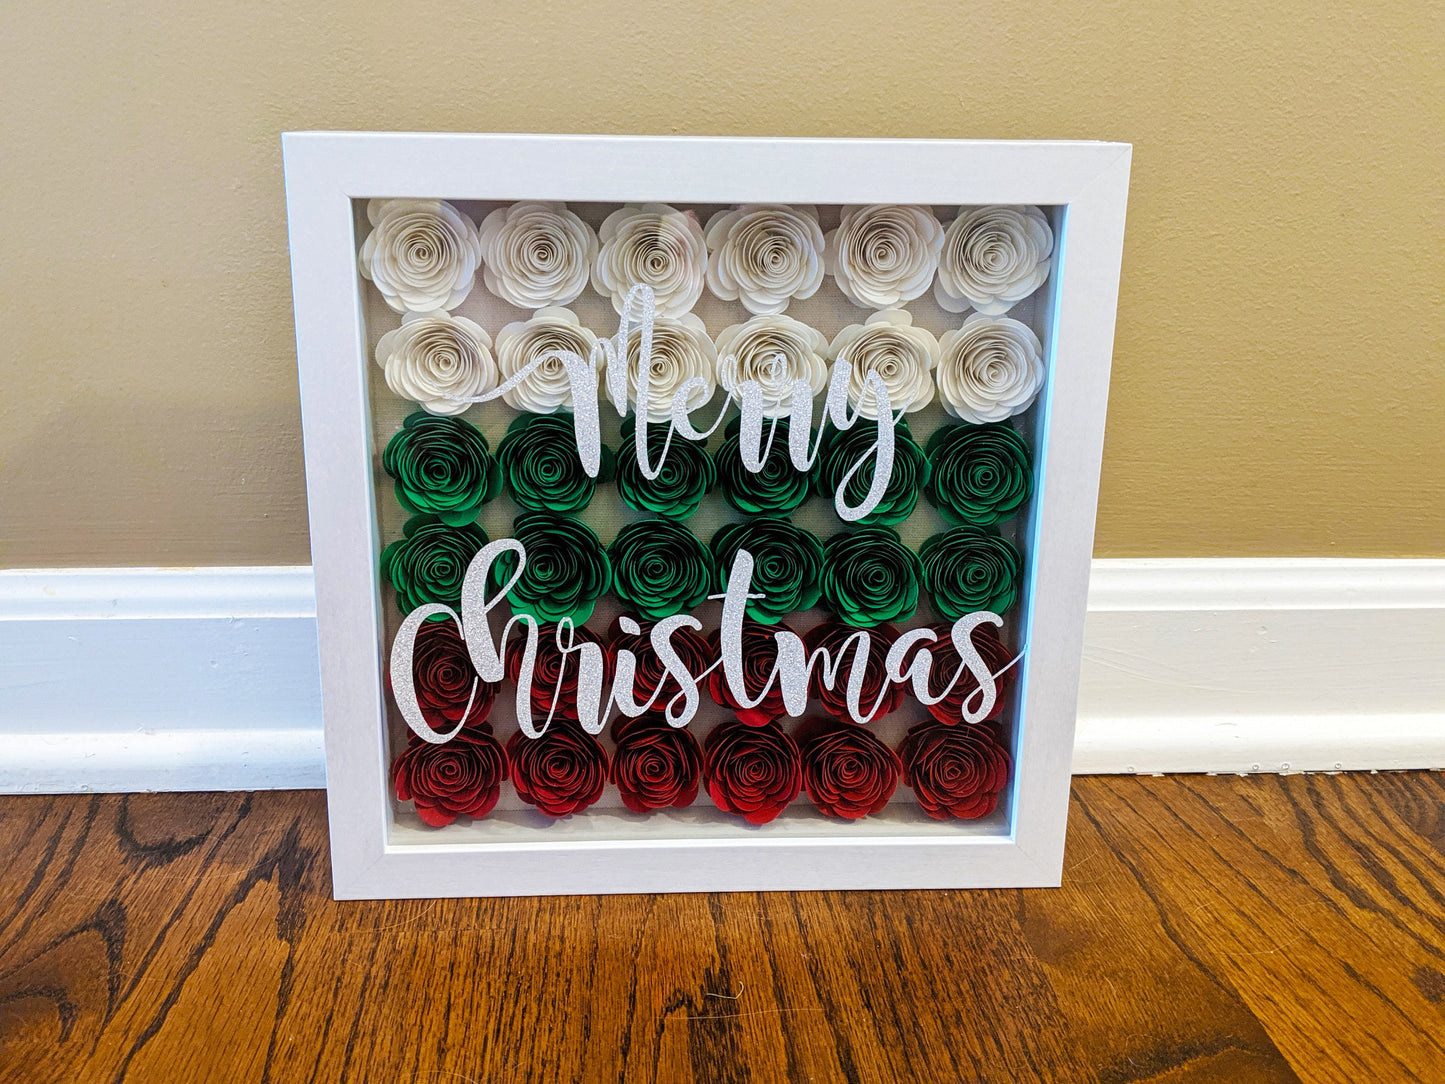 Merry Christmas rolled paper flower shadow box holiday home decor